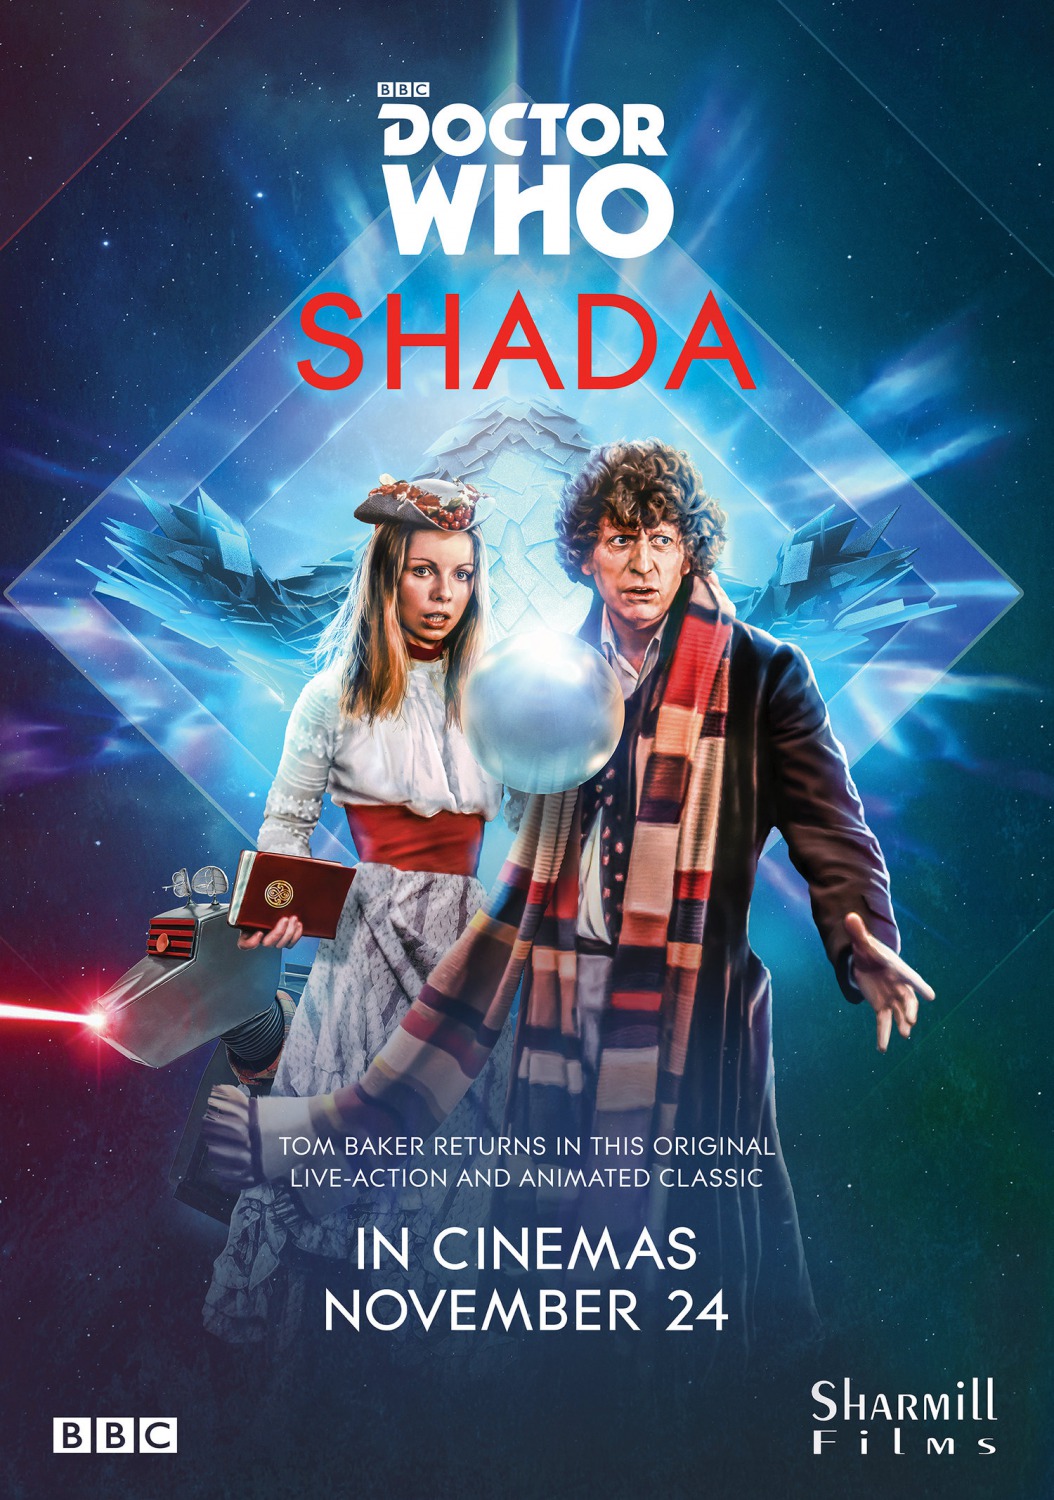 Extra Large Movie Poster Image for Doctor Who: Shada 